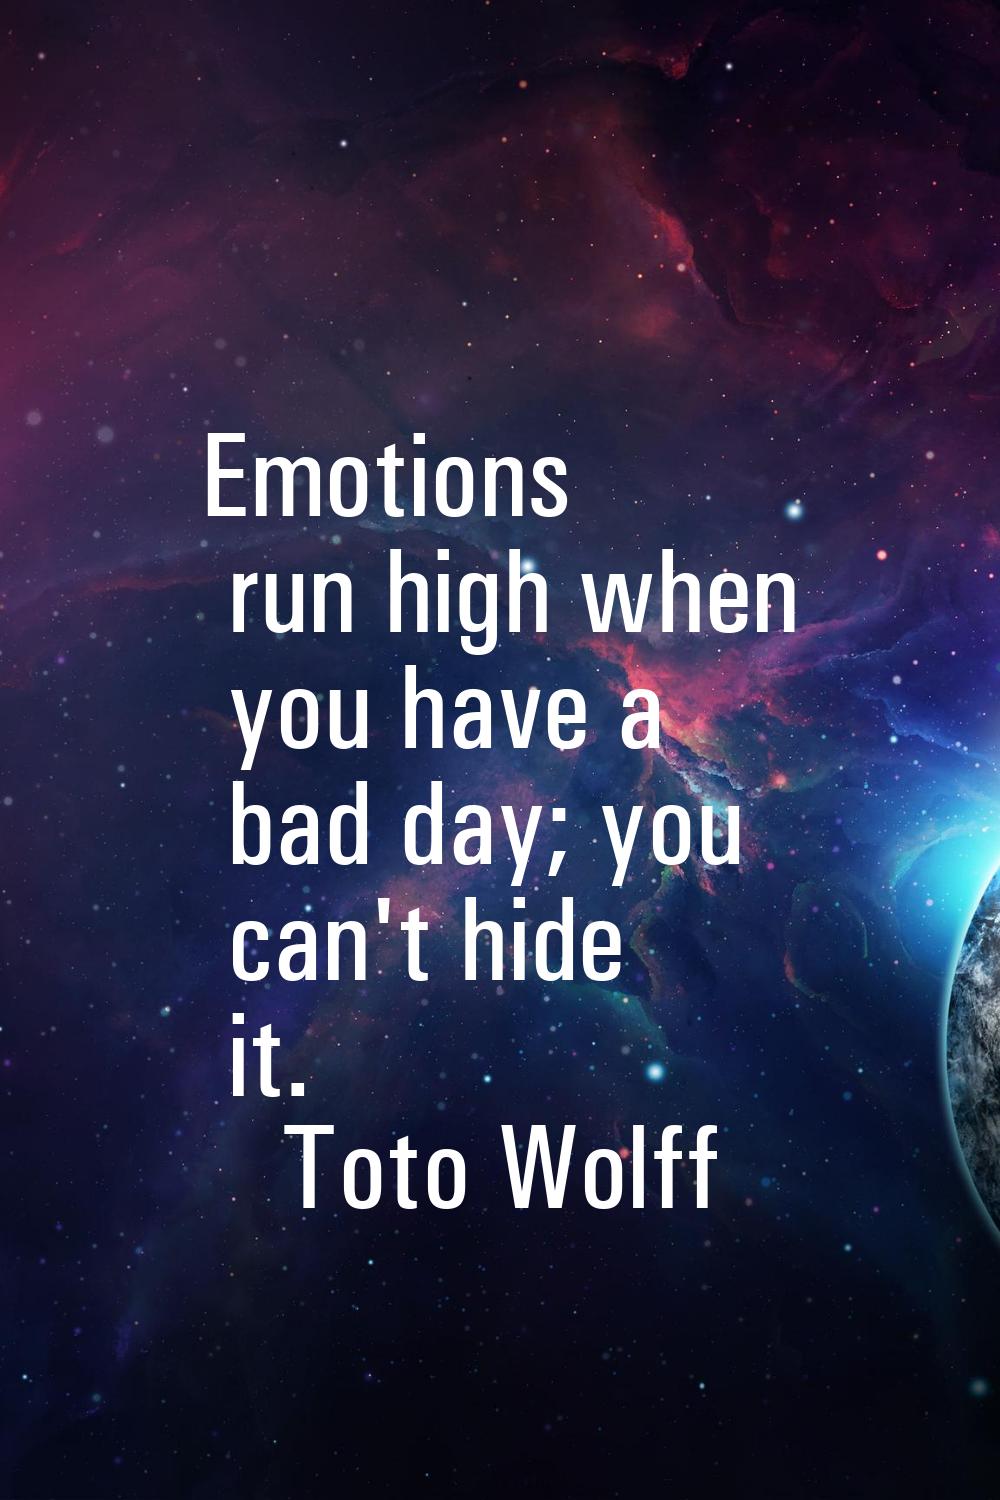 Emotions run high when you have a bad day; you can't hide it.